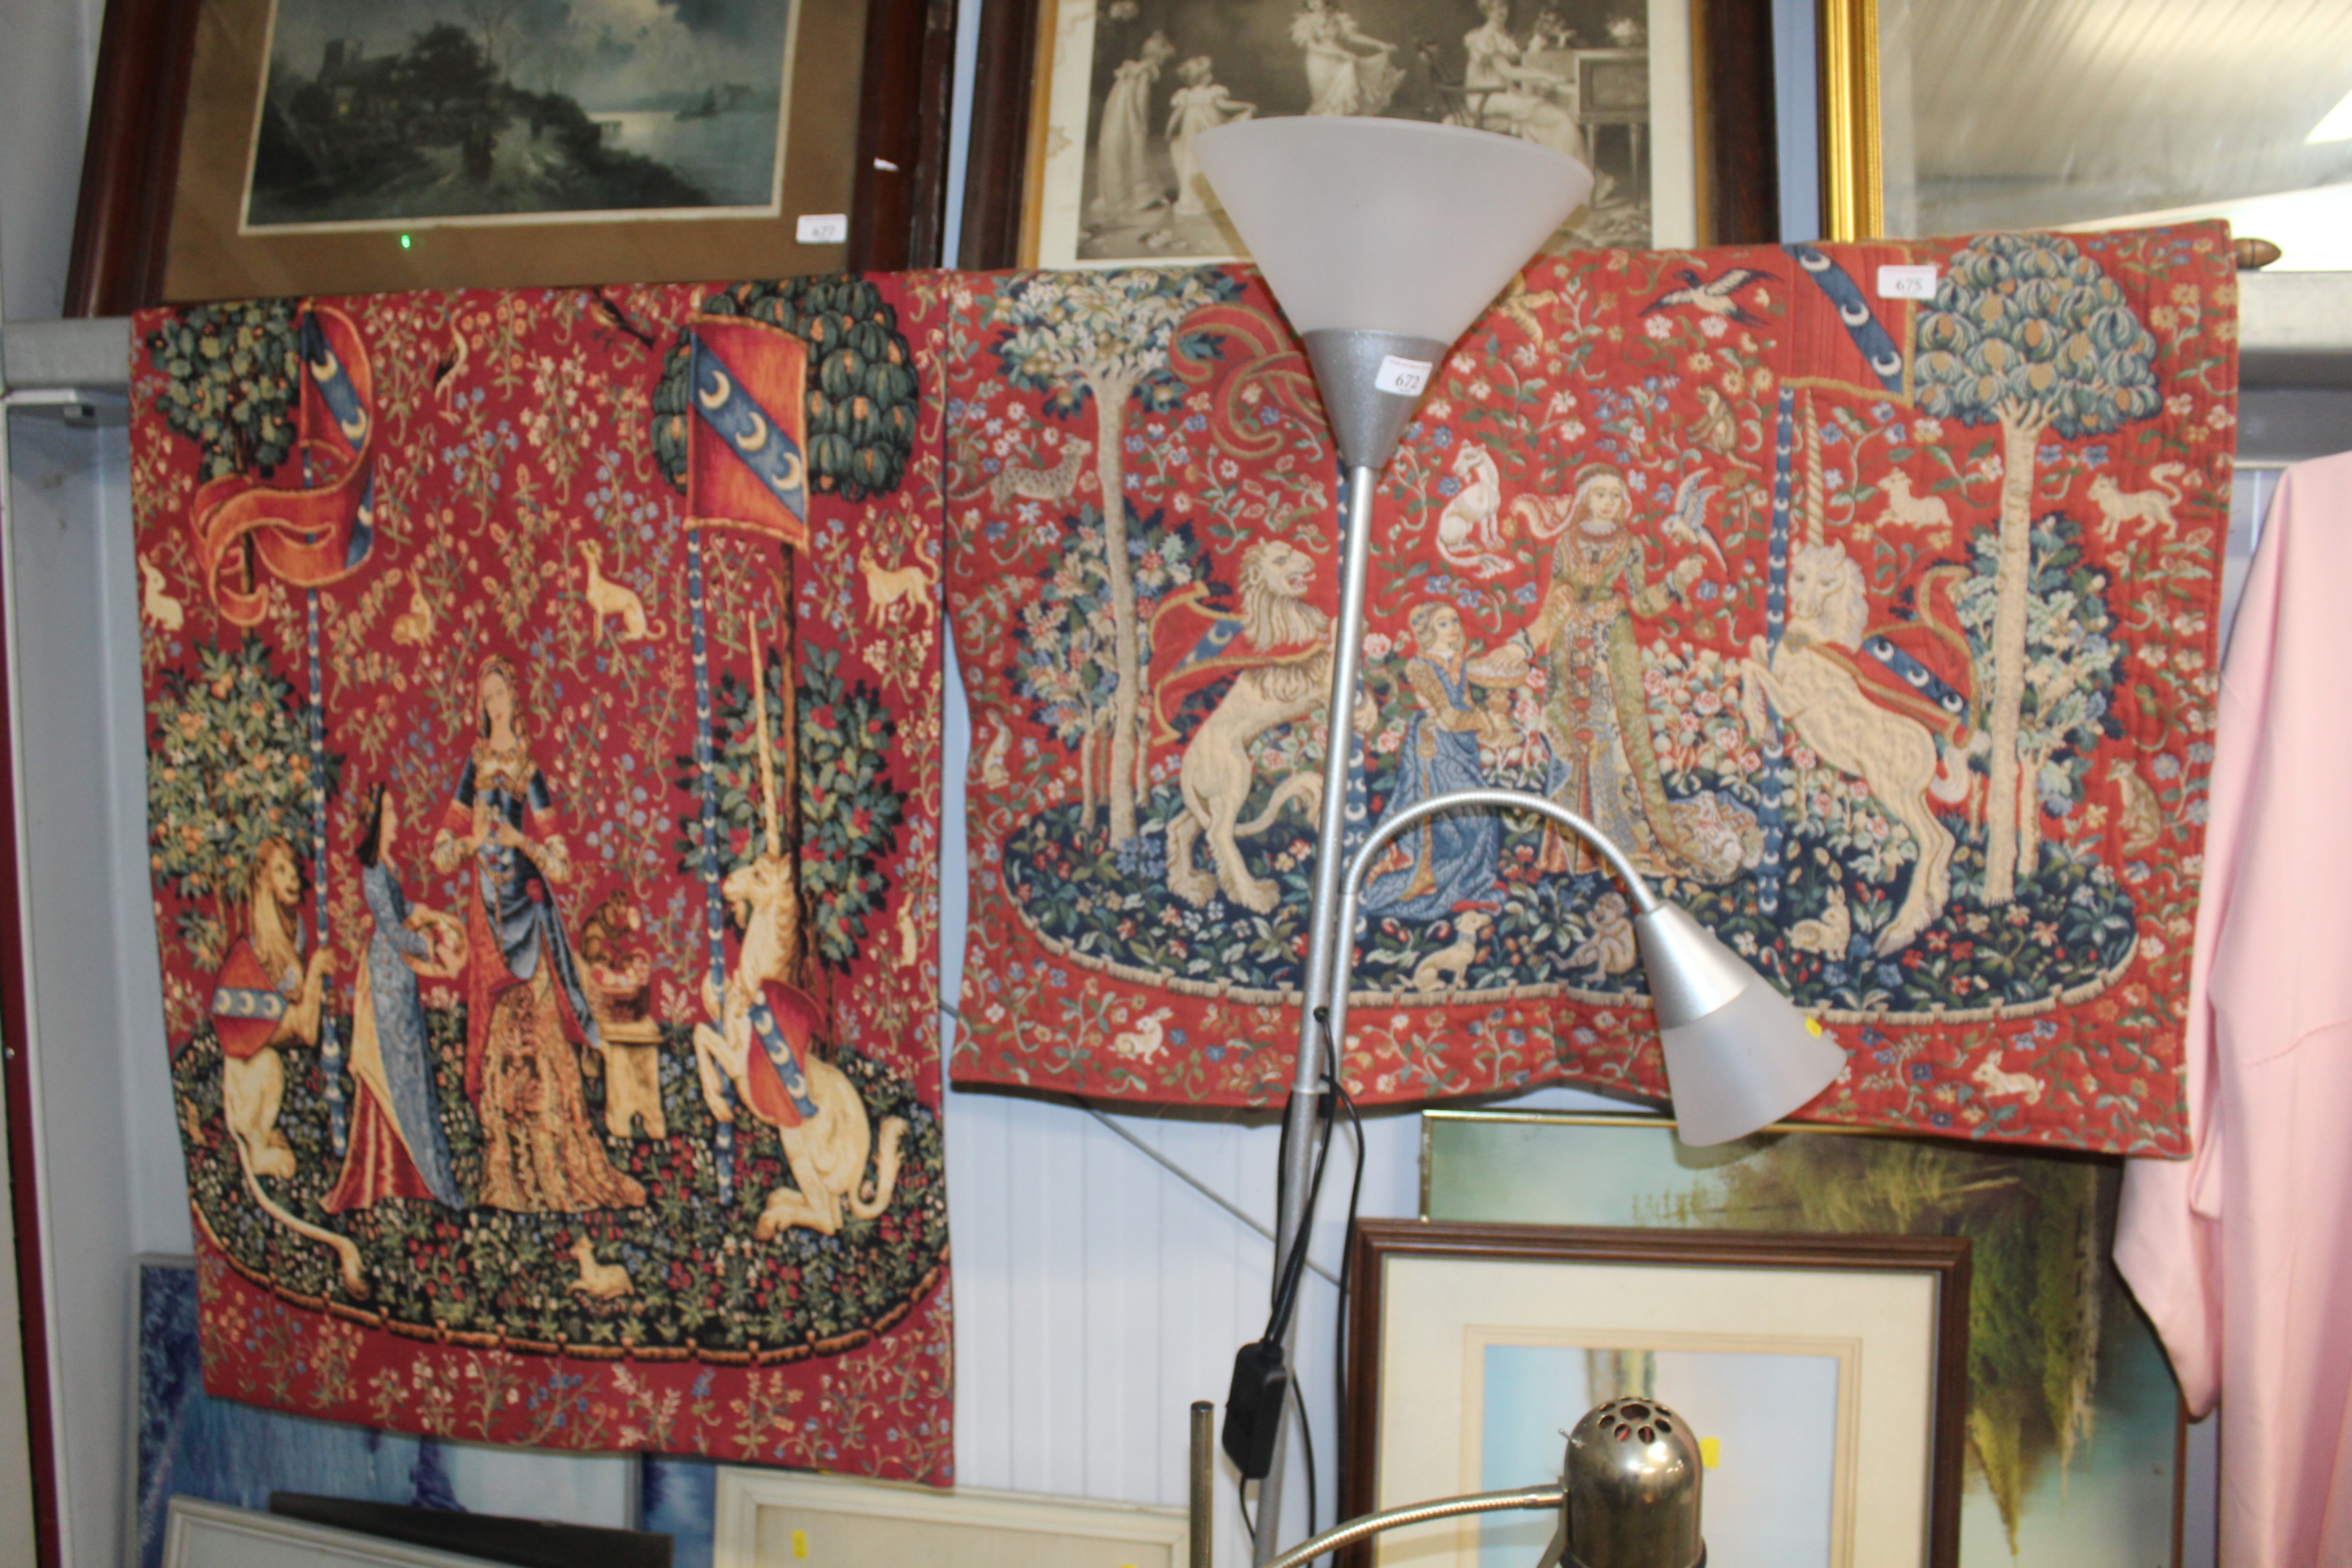 Two William Morris style wall hangings